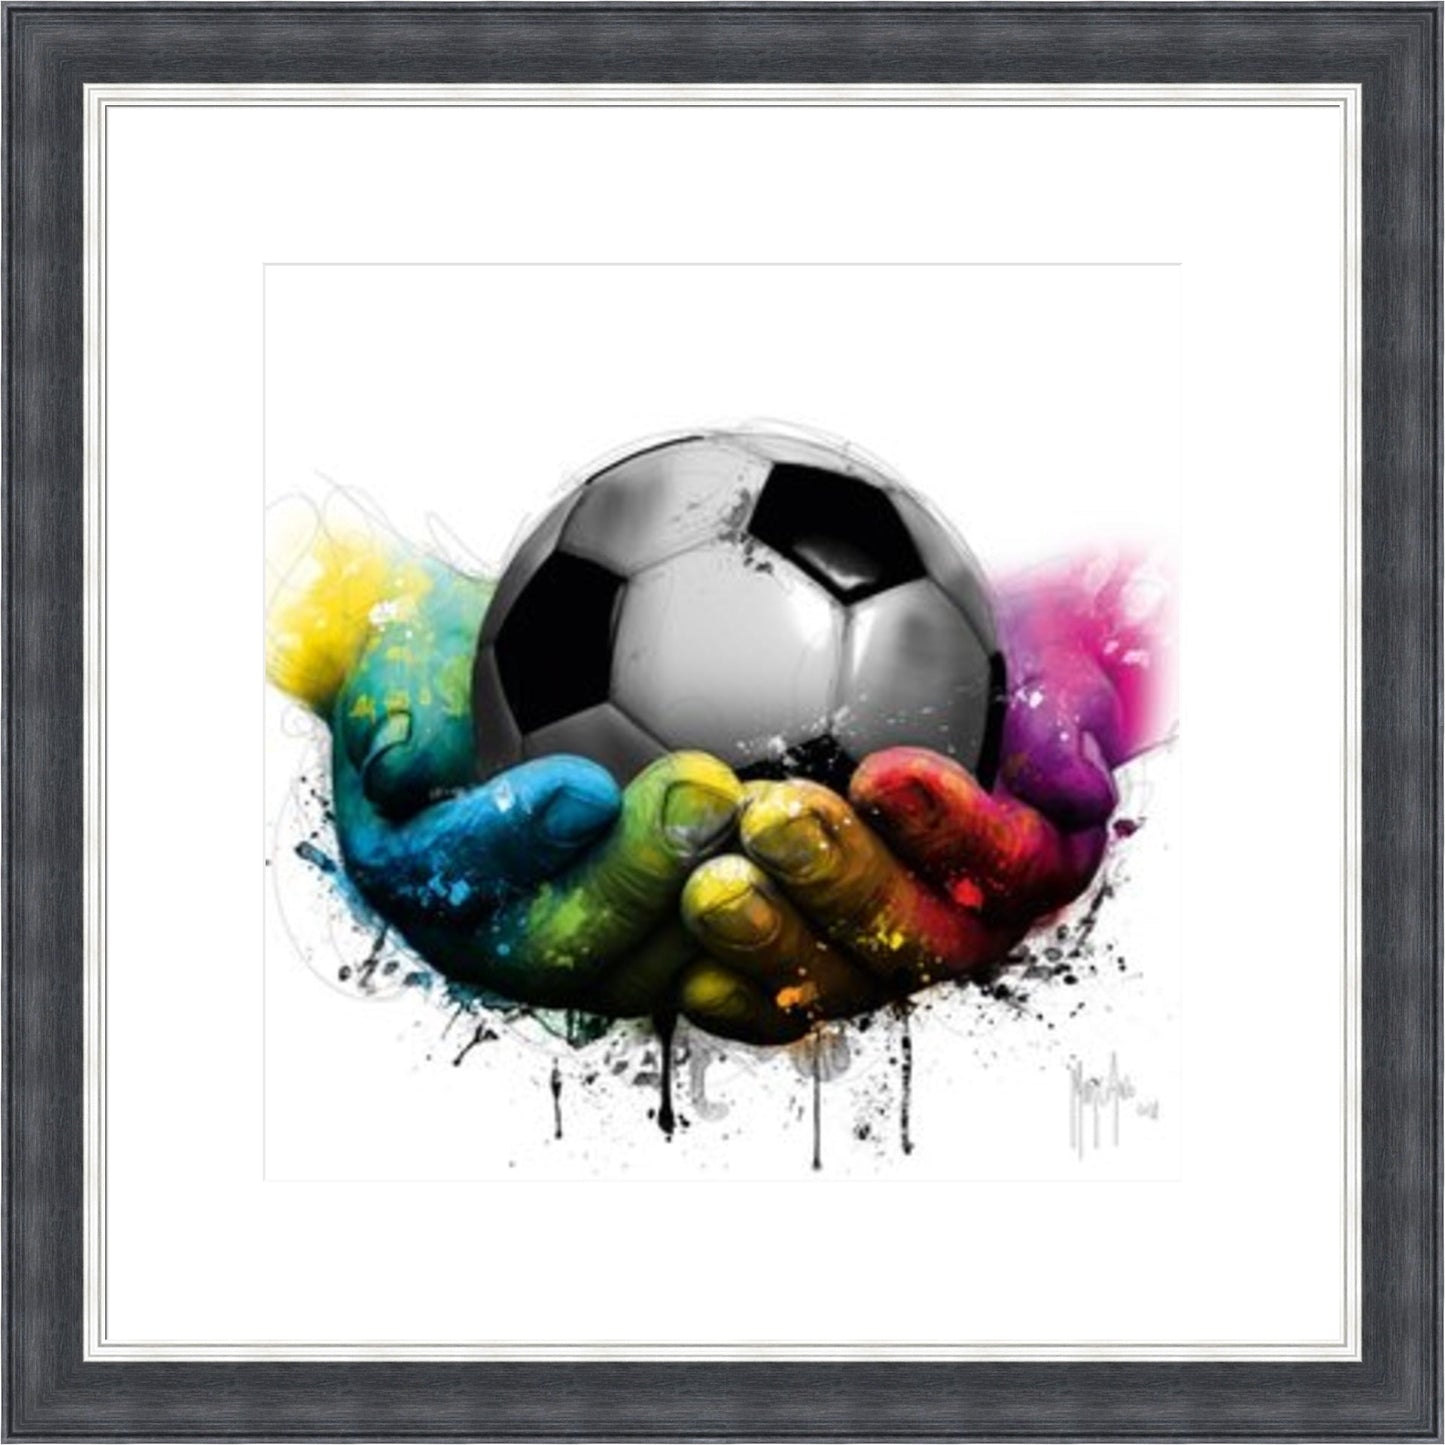 Coupe Du Monde - World Cup by Patrice Murciano